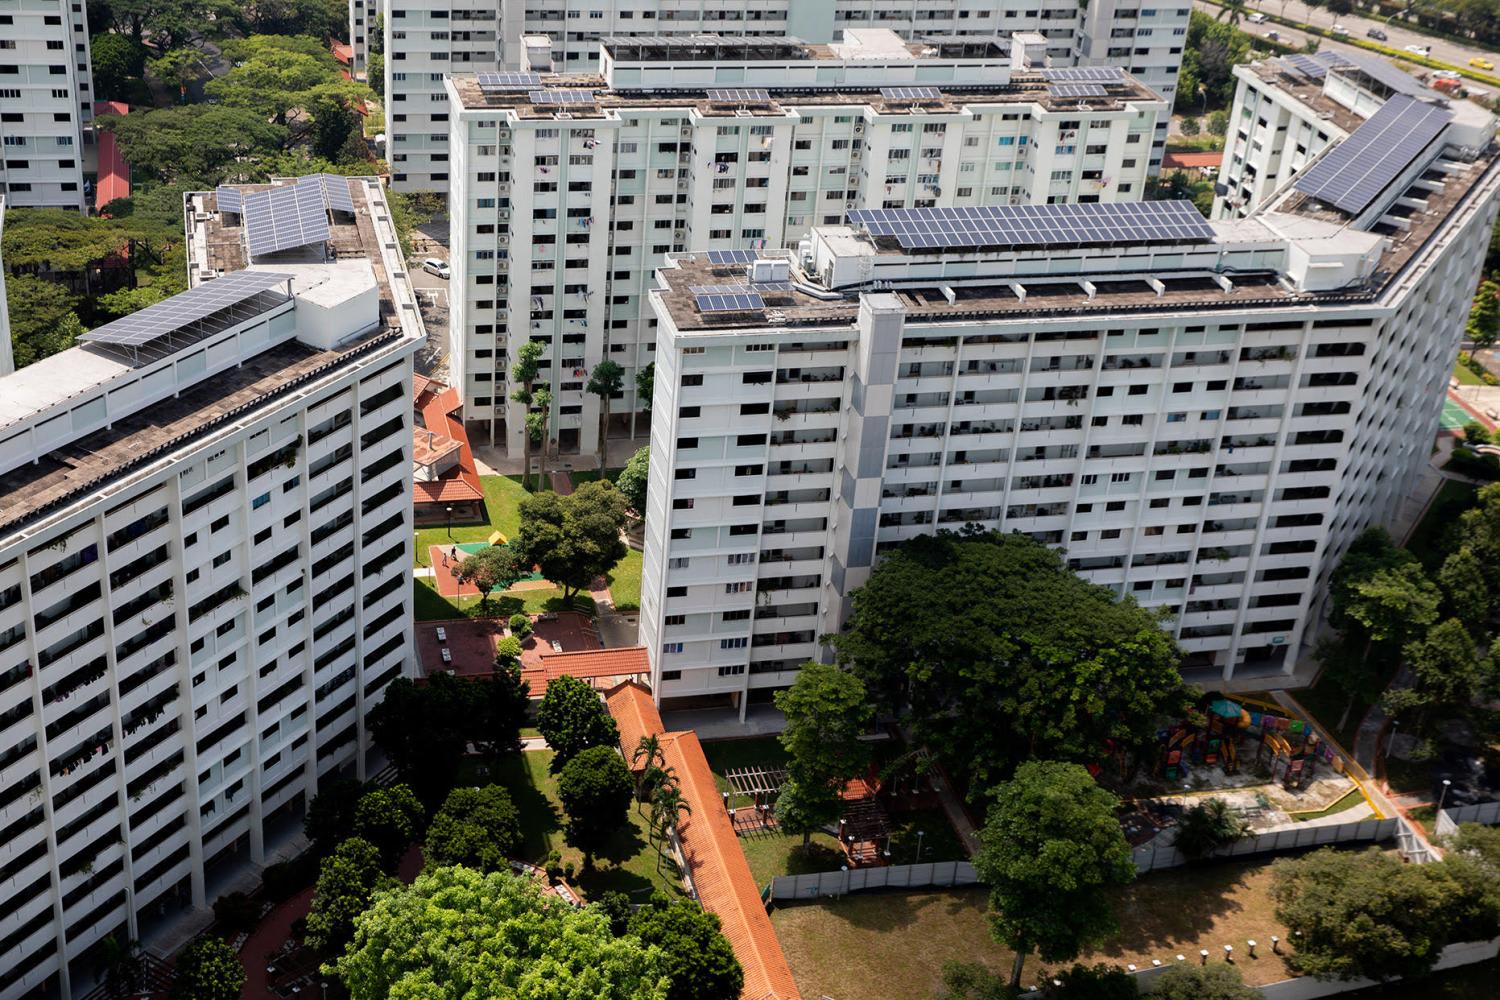 The Ang Mo Kio Avenue 3 estate where four Housing and Development Board blocks had been identified for redevelopment under the Selective En bloc Redevelopment Scheme (Sers).